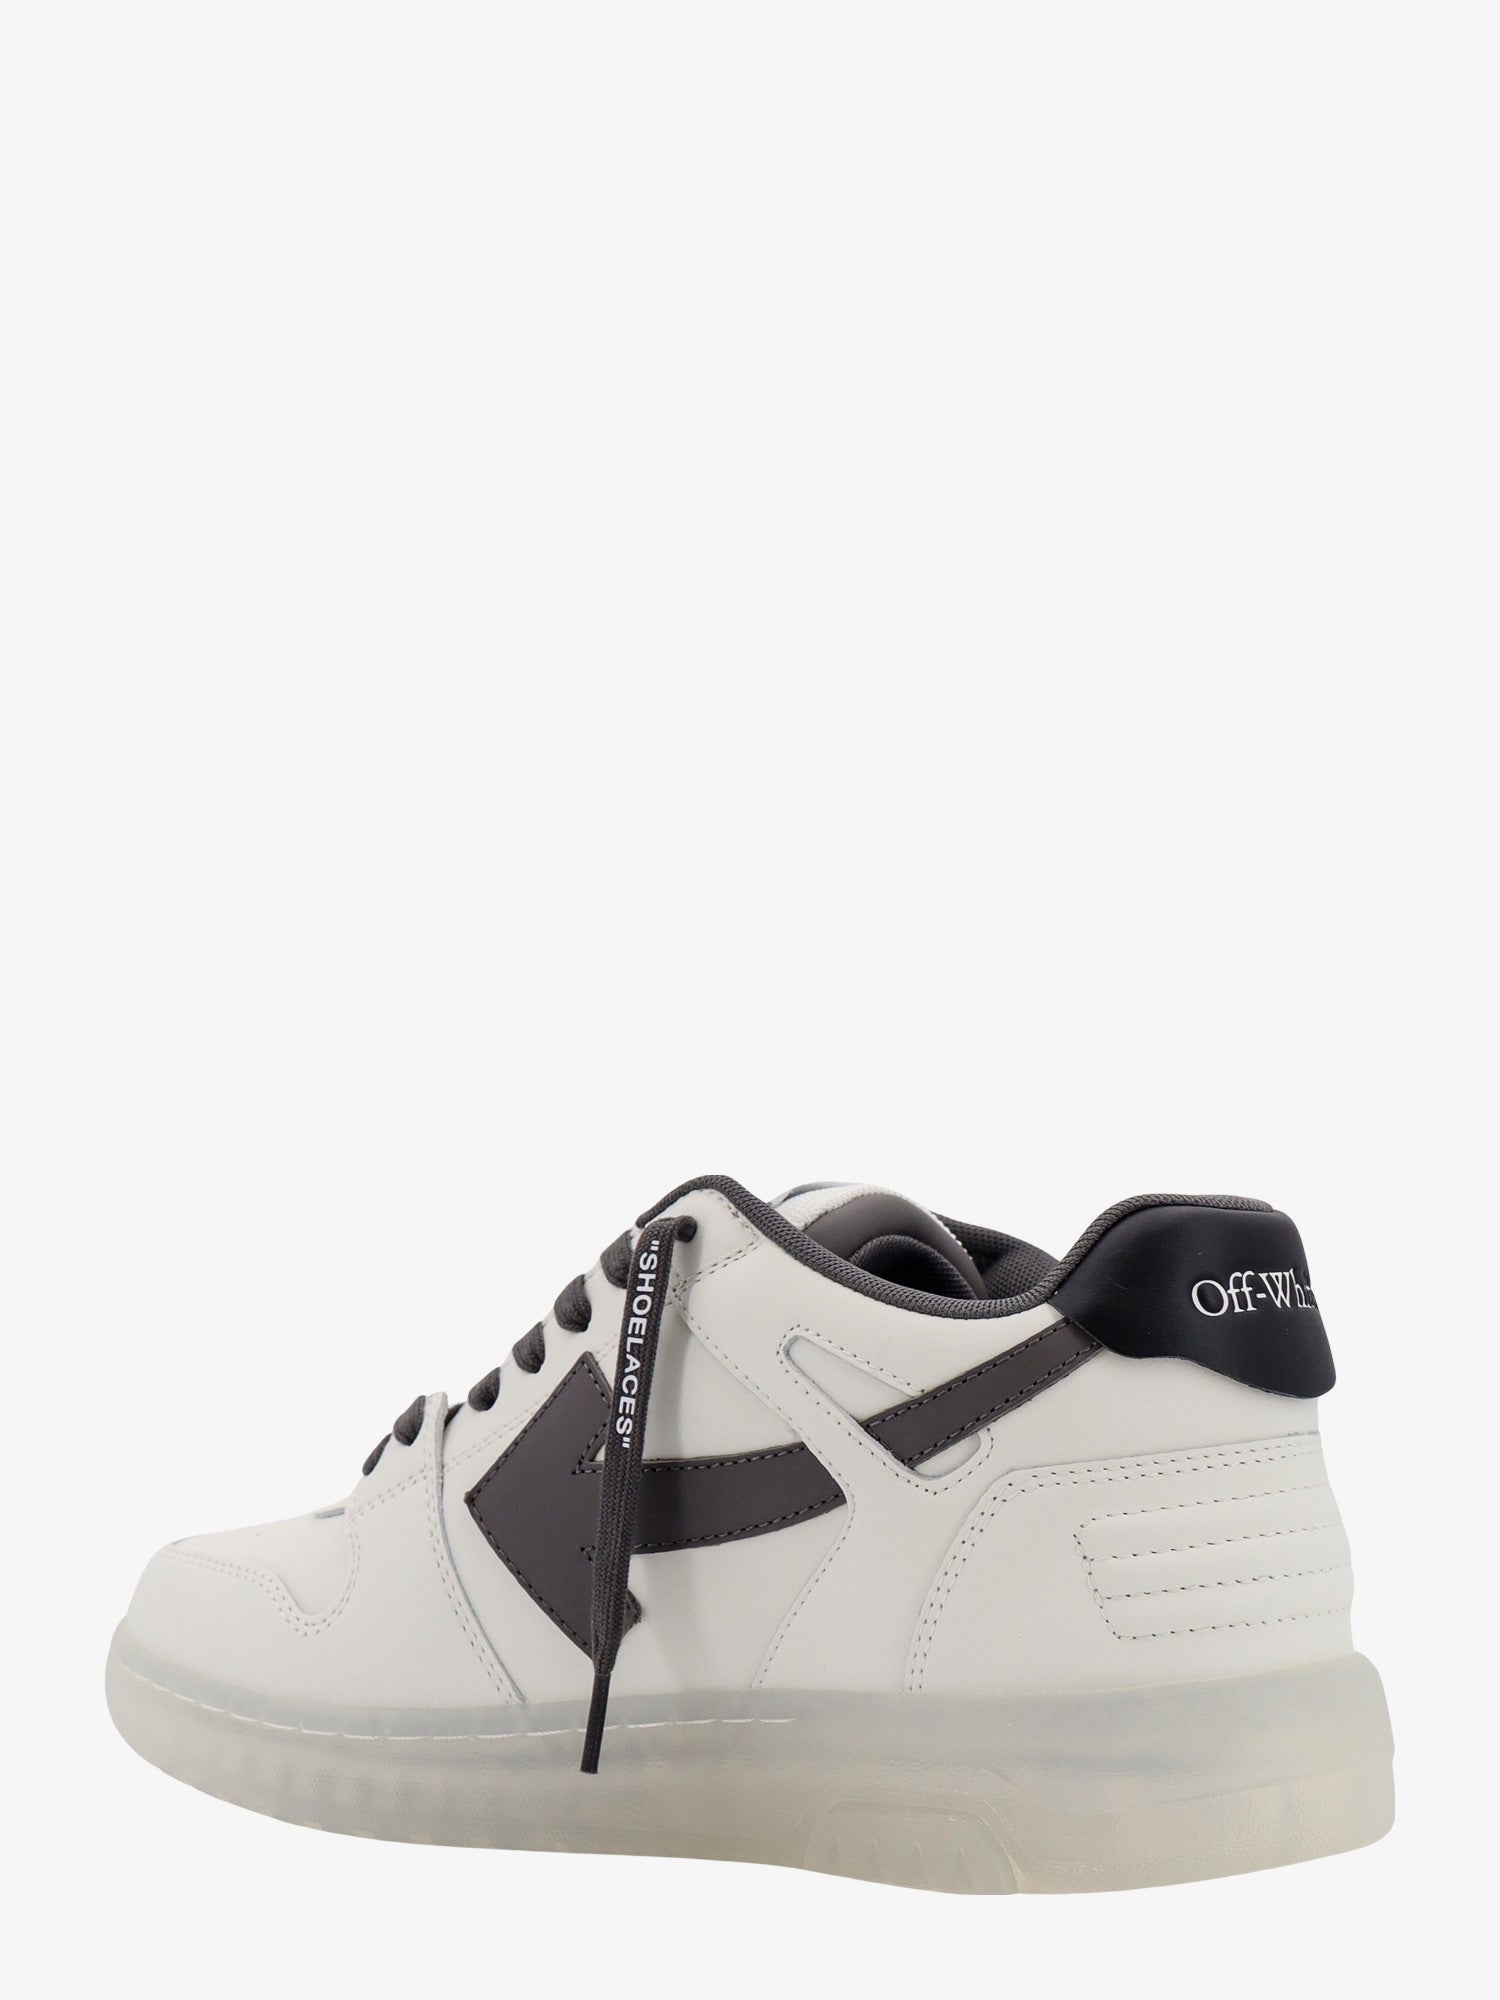 Off White Man Out Of Office Transparent Man White Sneakers - 3